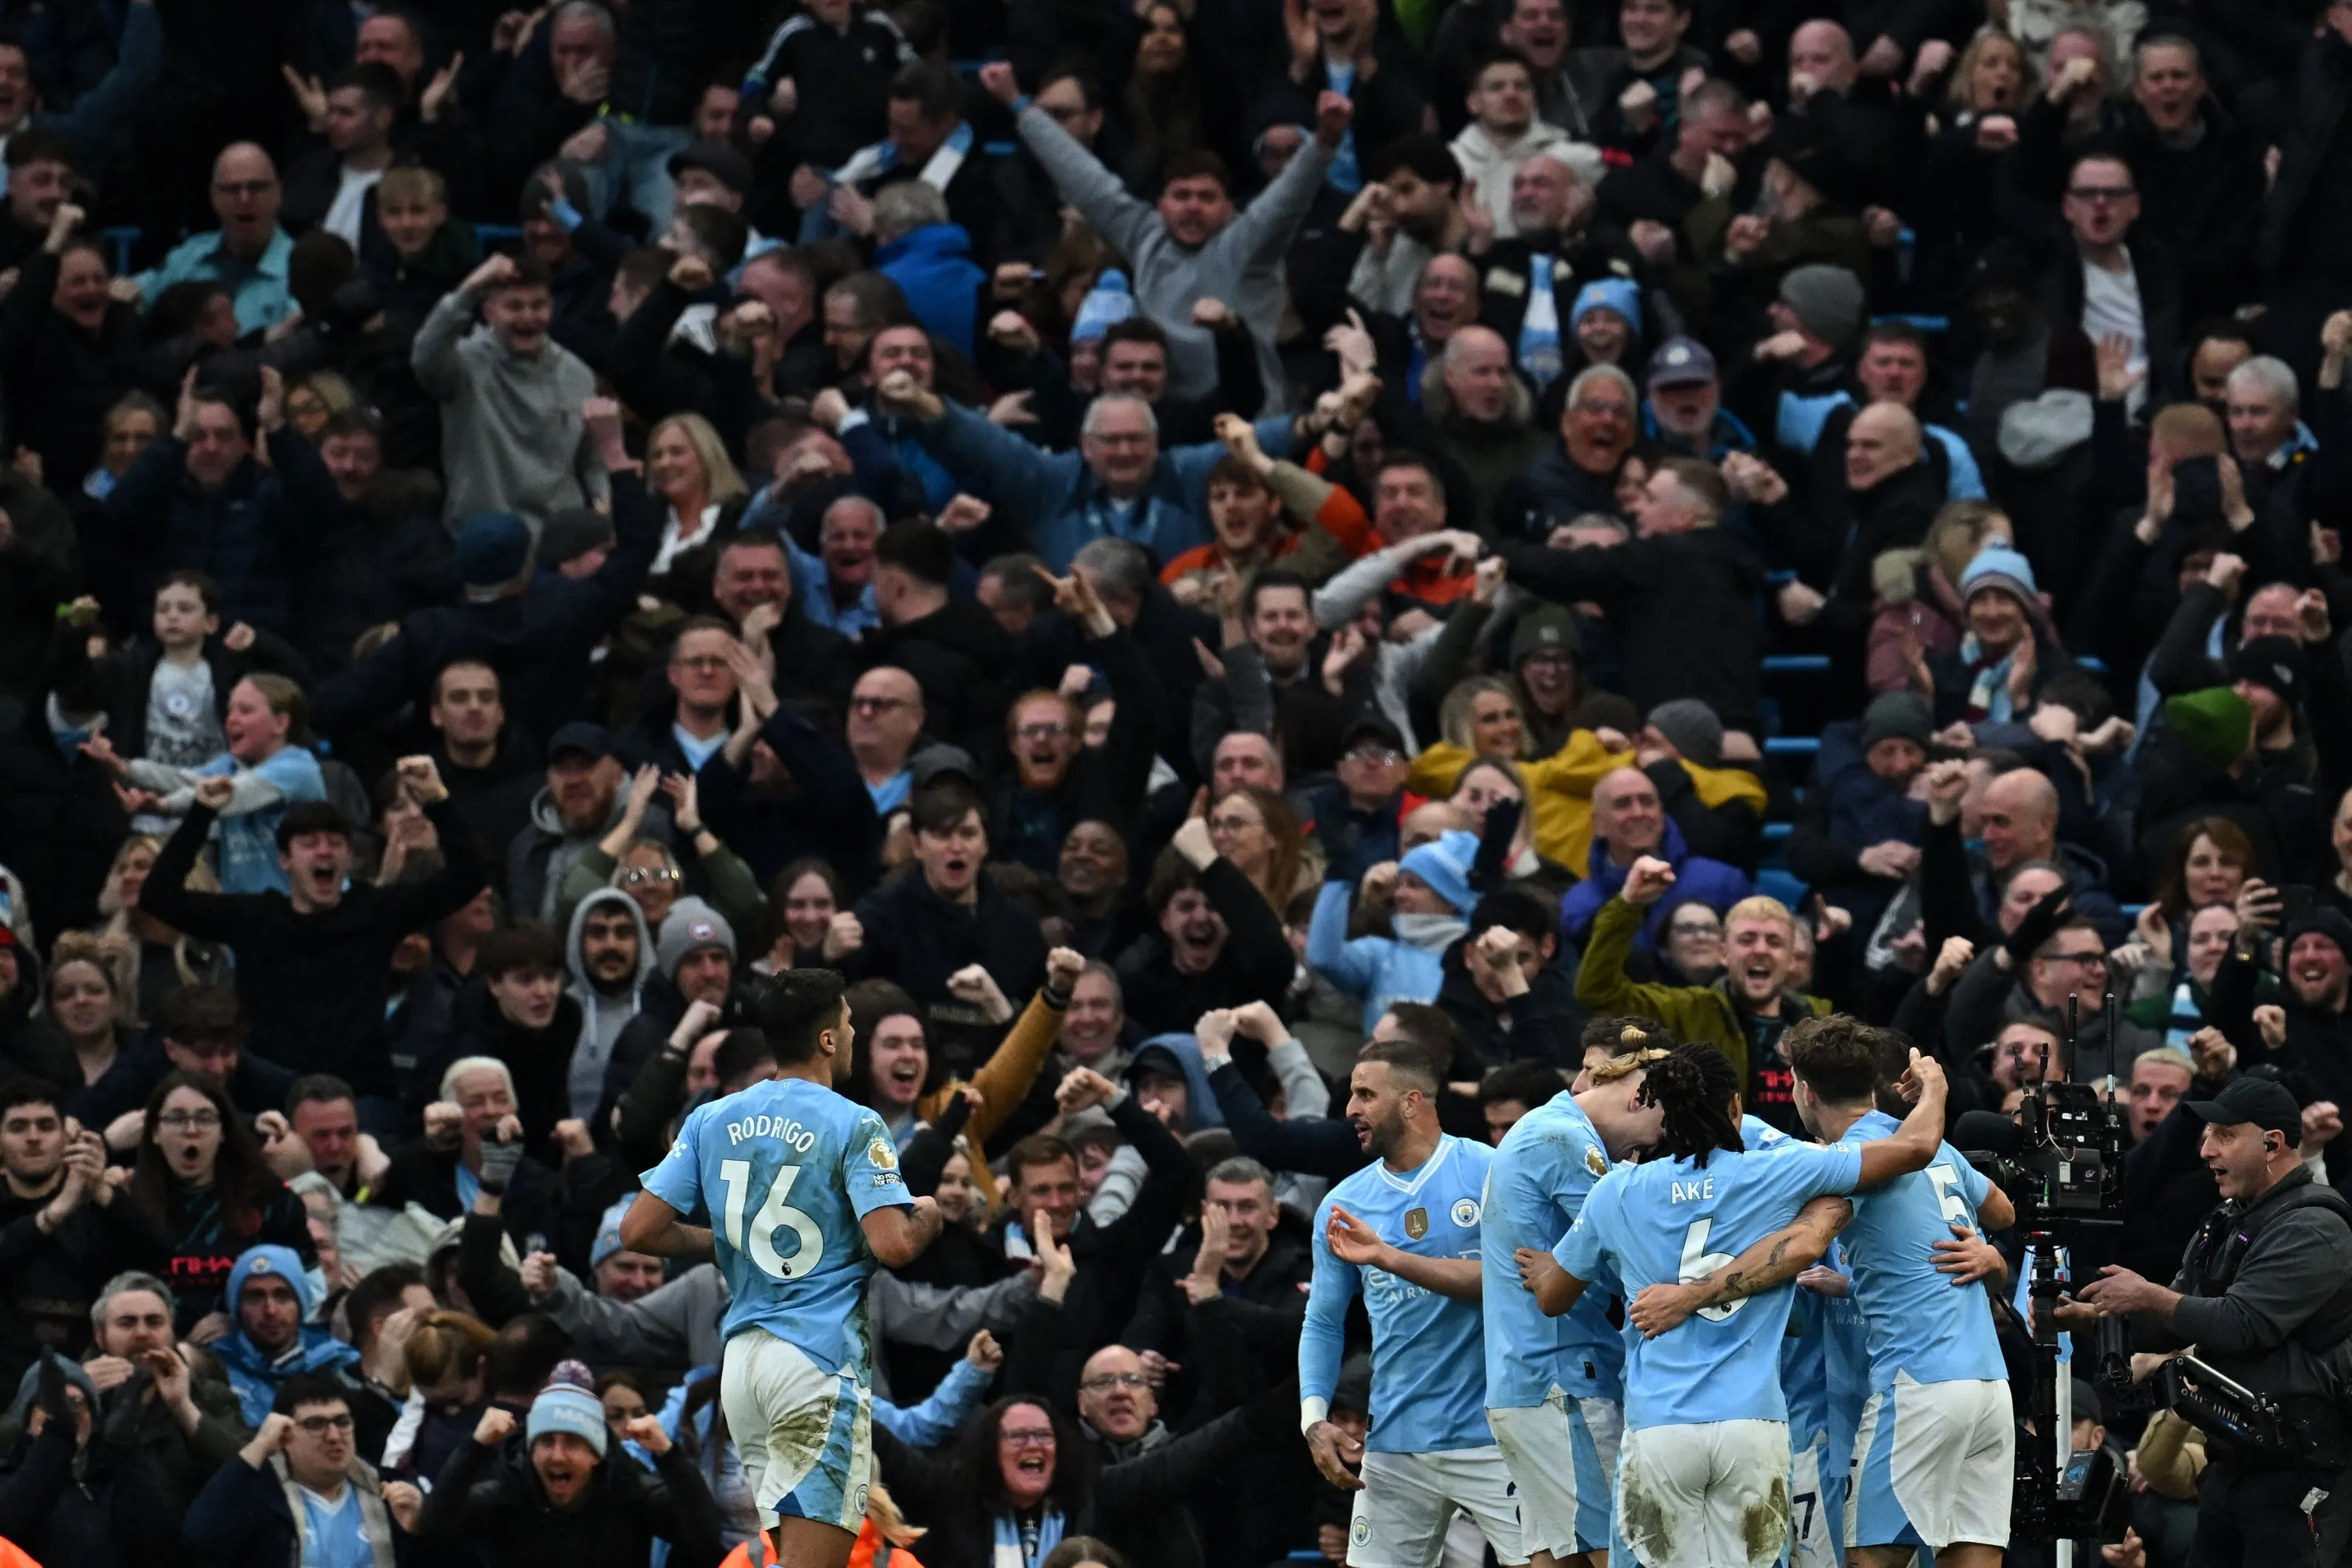 Manchester City wint in spannend duel van Manchester United